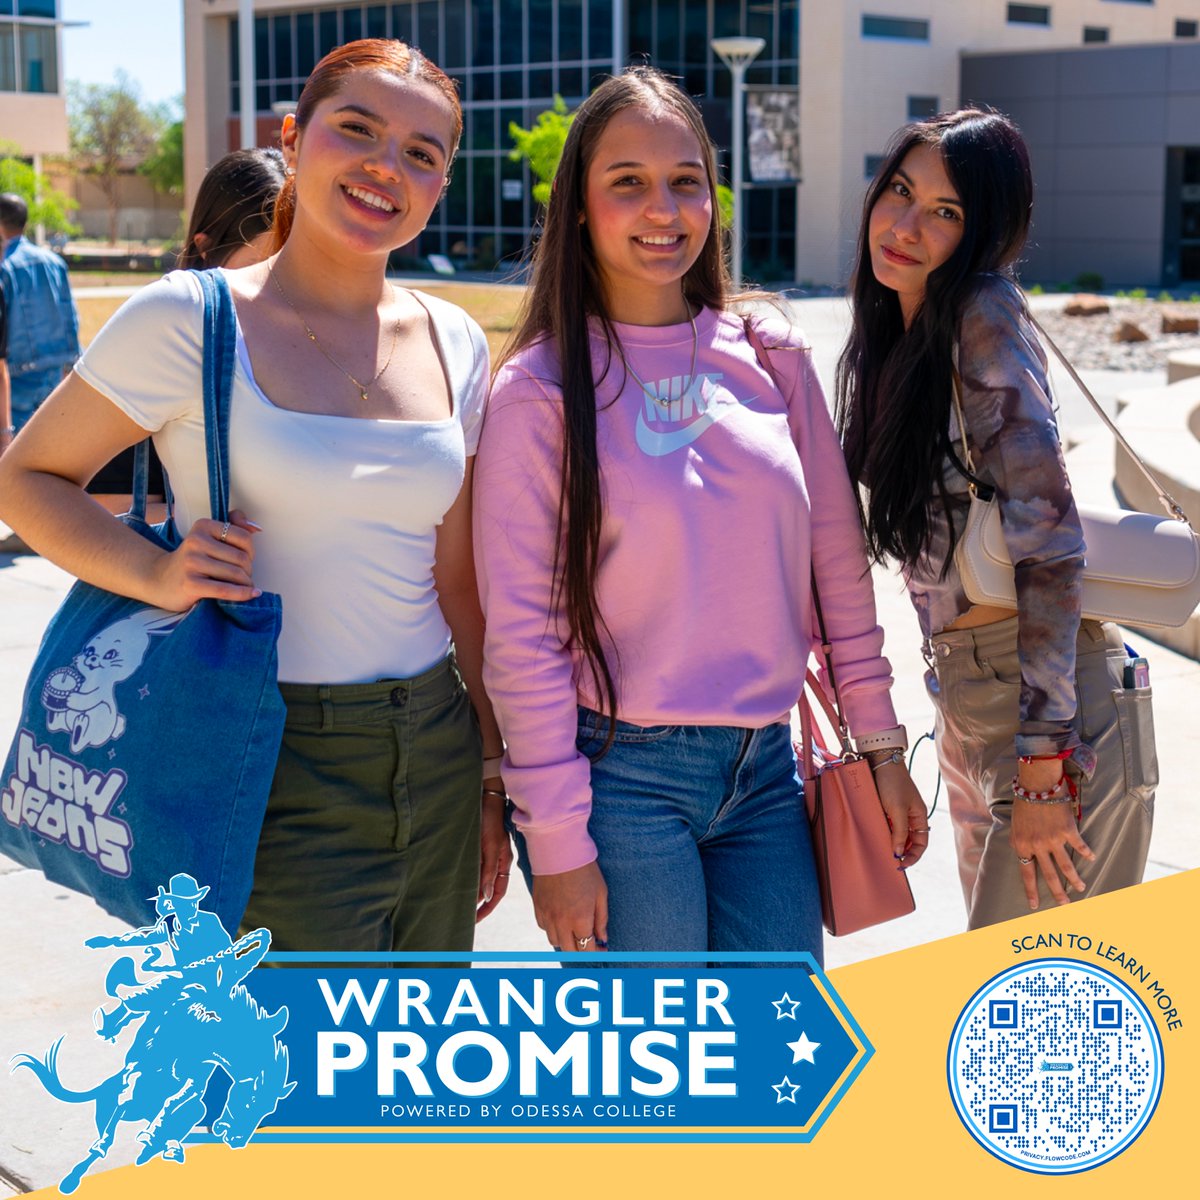 0 day to go for...Wrangler Promise! 🏇 The deadline to sign the Pledge form is TODAY, April 15th. 🖊 Do you know...? 👀 The high school graduating class of 2024 will be the inaugural class of Wrangler Promise! For more information visit: odessa.edu/future-student…